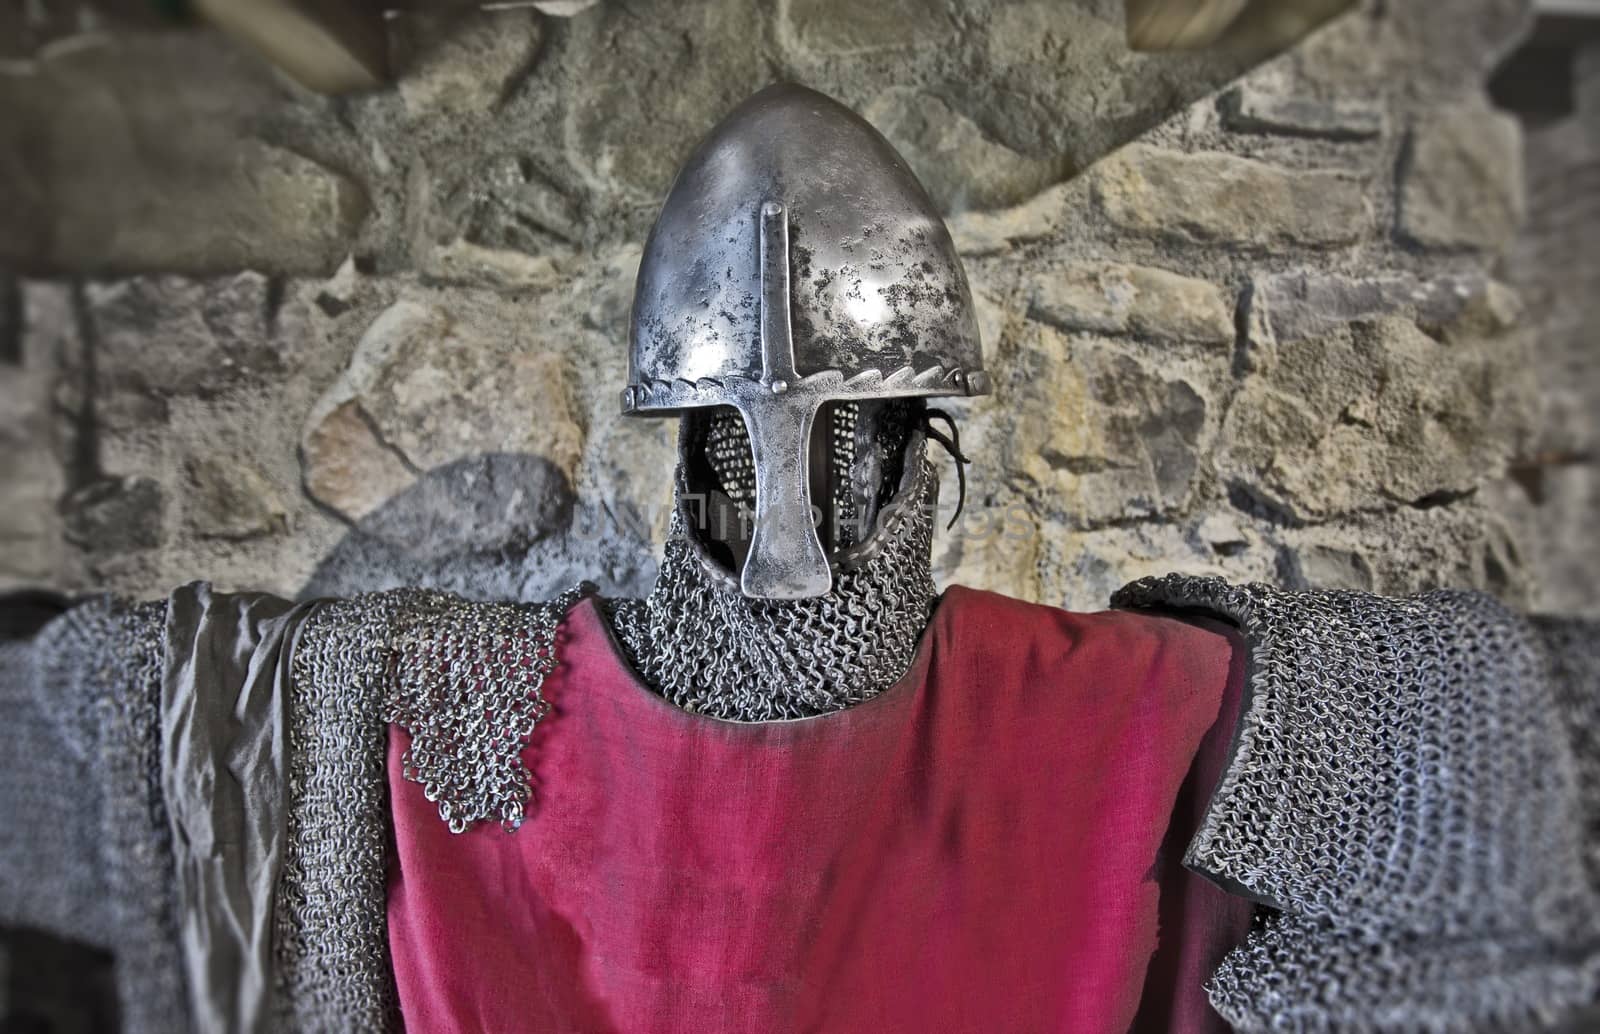 Close-up picture of a medieval armor